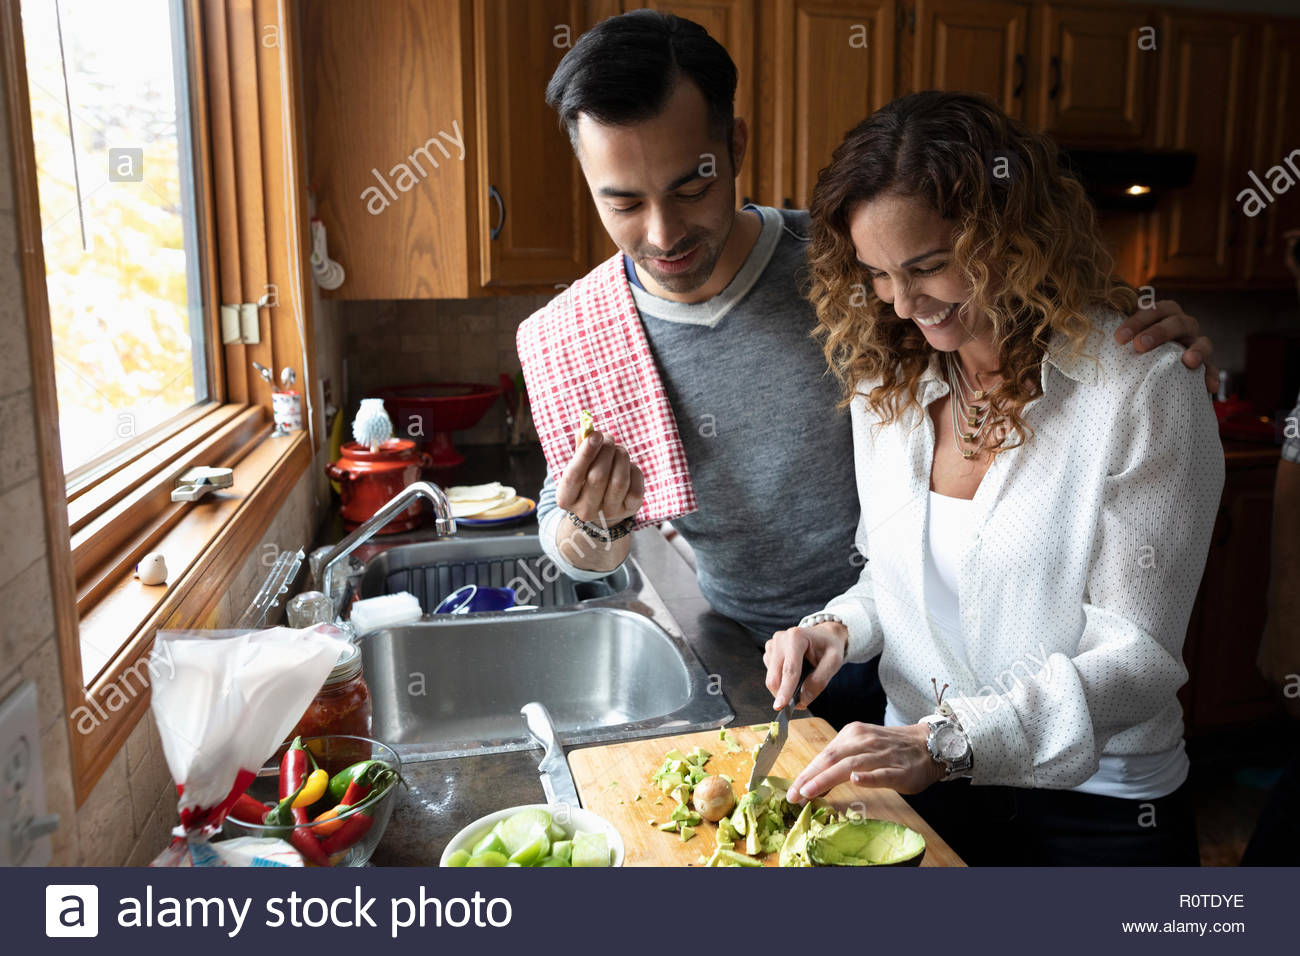 Latinx couple cooking, cutting avocados in kitchen Stock Photo